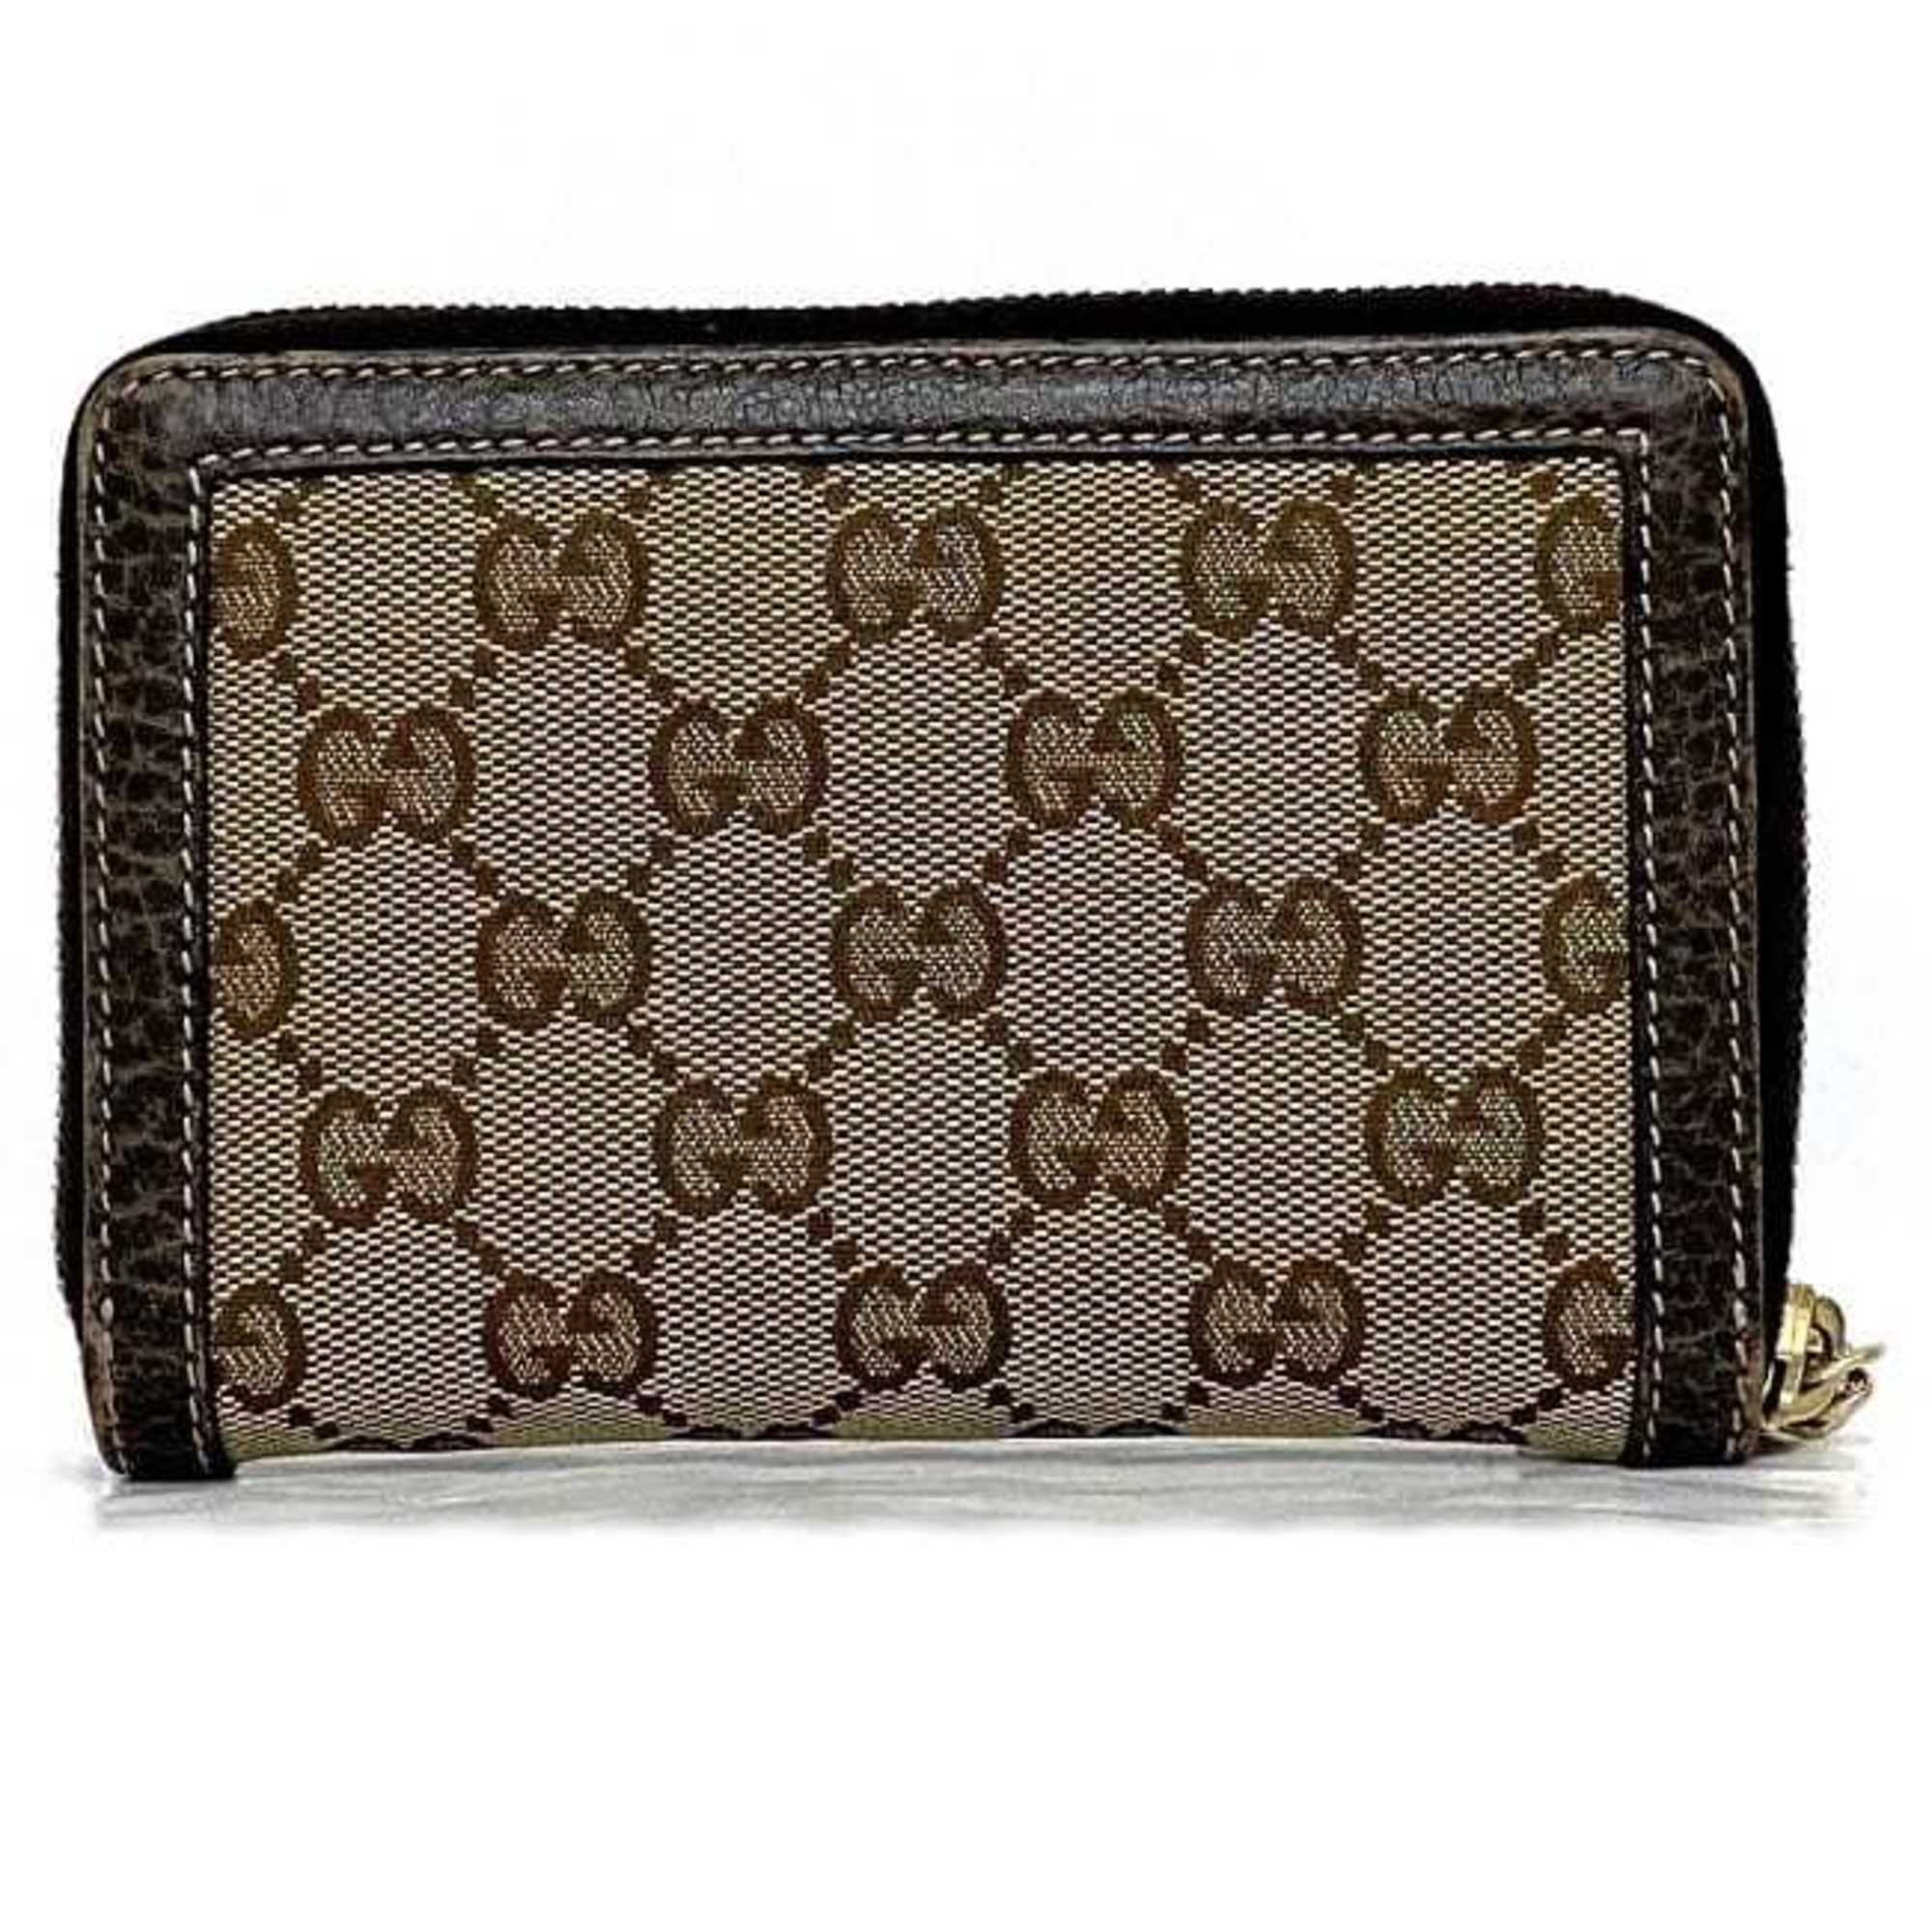 Gucci Bifold Round Wallet Beige Brown GG Bamboo 224256 Tassel Canvas Leather GUCCI Compact Folding Ladies